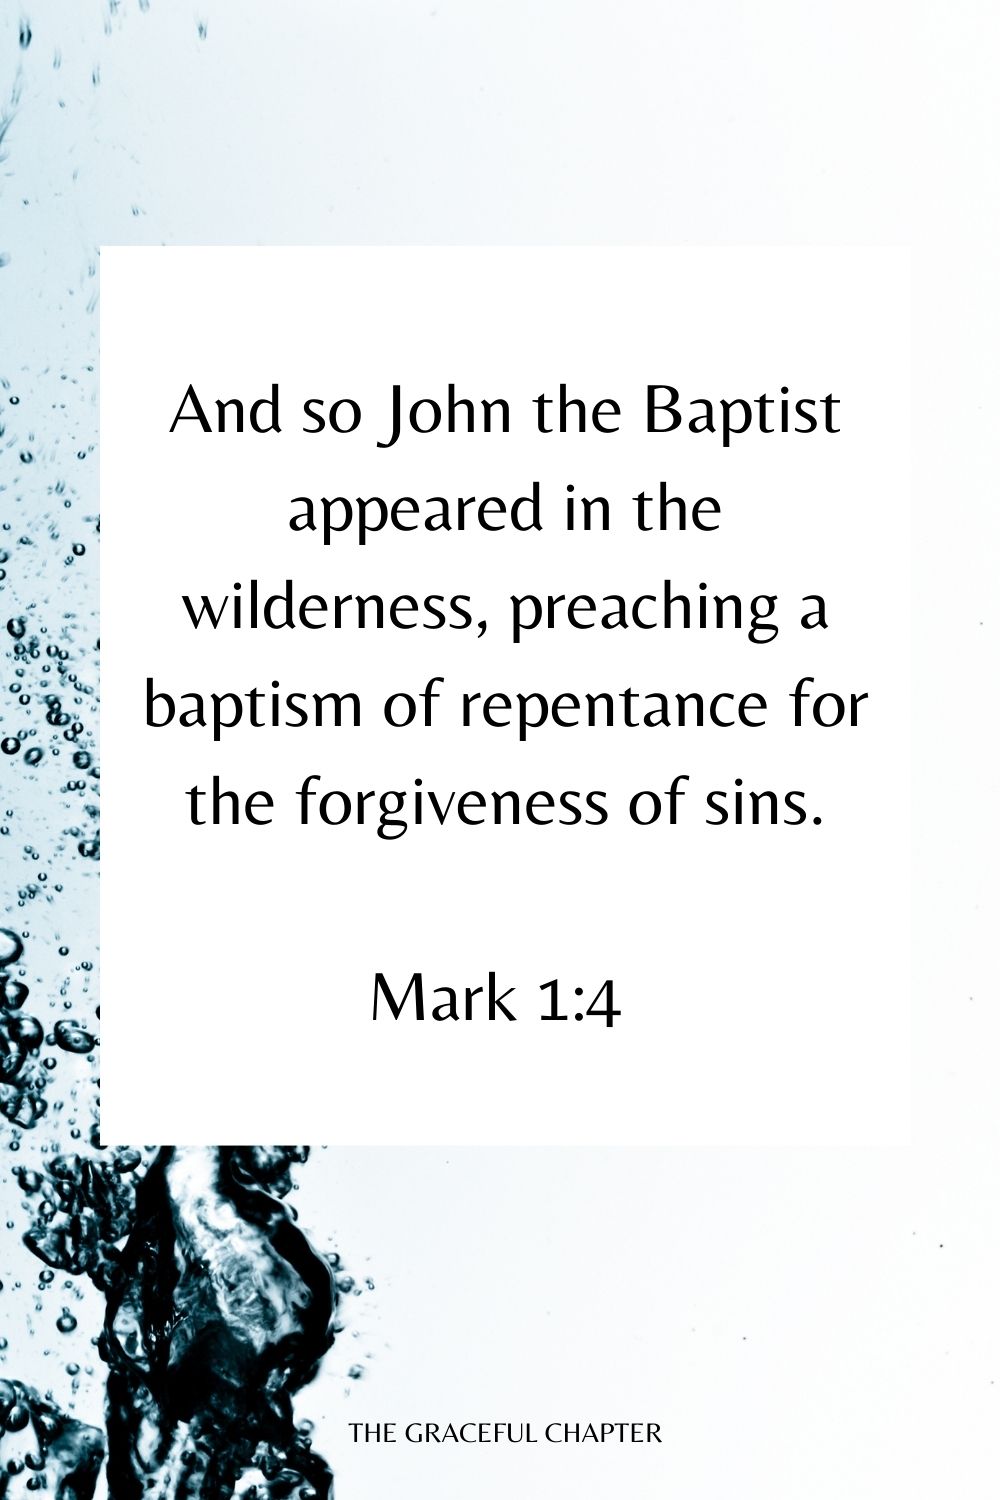 And so John the Baptist appeared in the wilderness, preaching a baptism of repentance for the forgiveness of sins. Mark 1:4